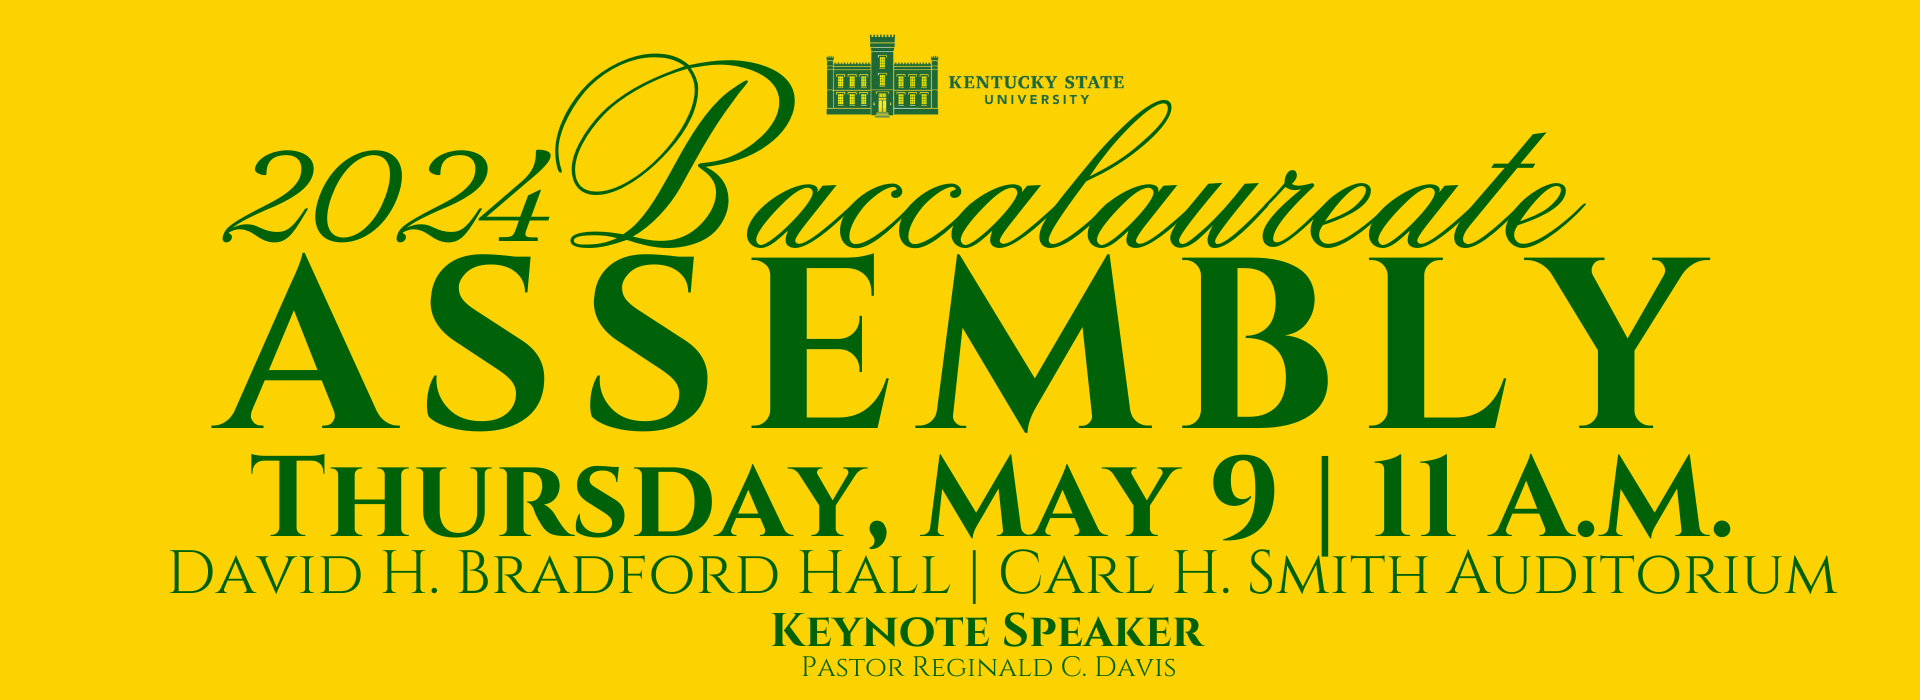 2024 Baccalaureate Assembly Graphic - Thursday, May 9 at 11 am at David. H Bradford Hall - Carl Smith Auditorium